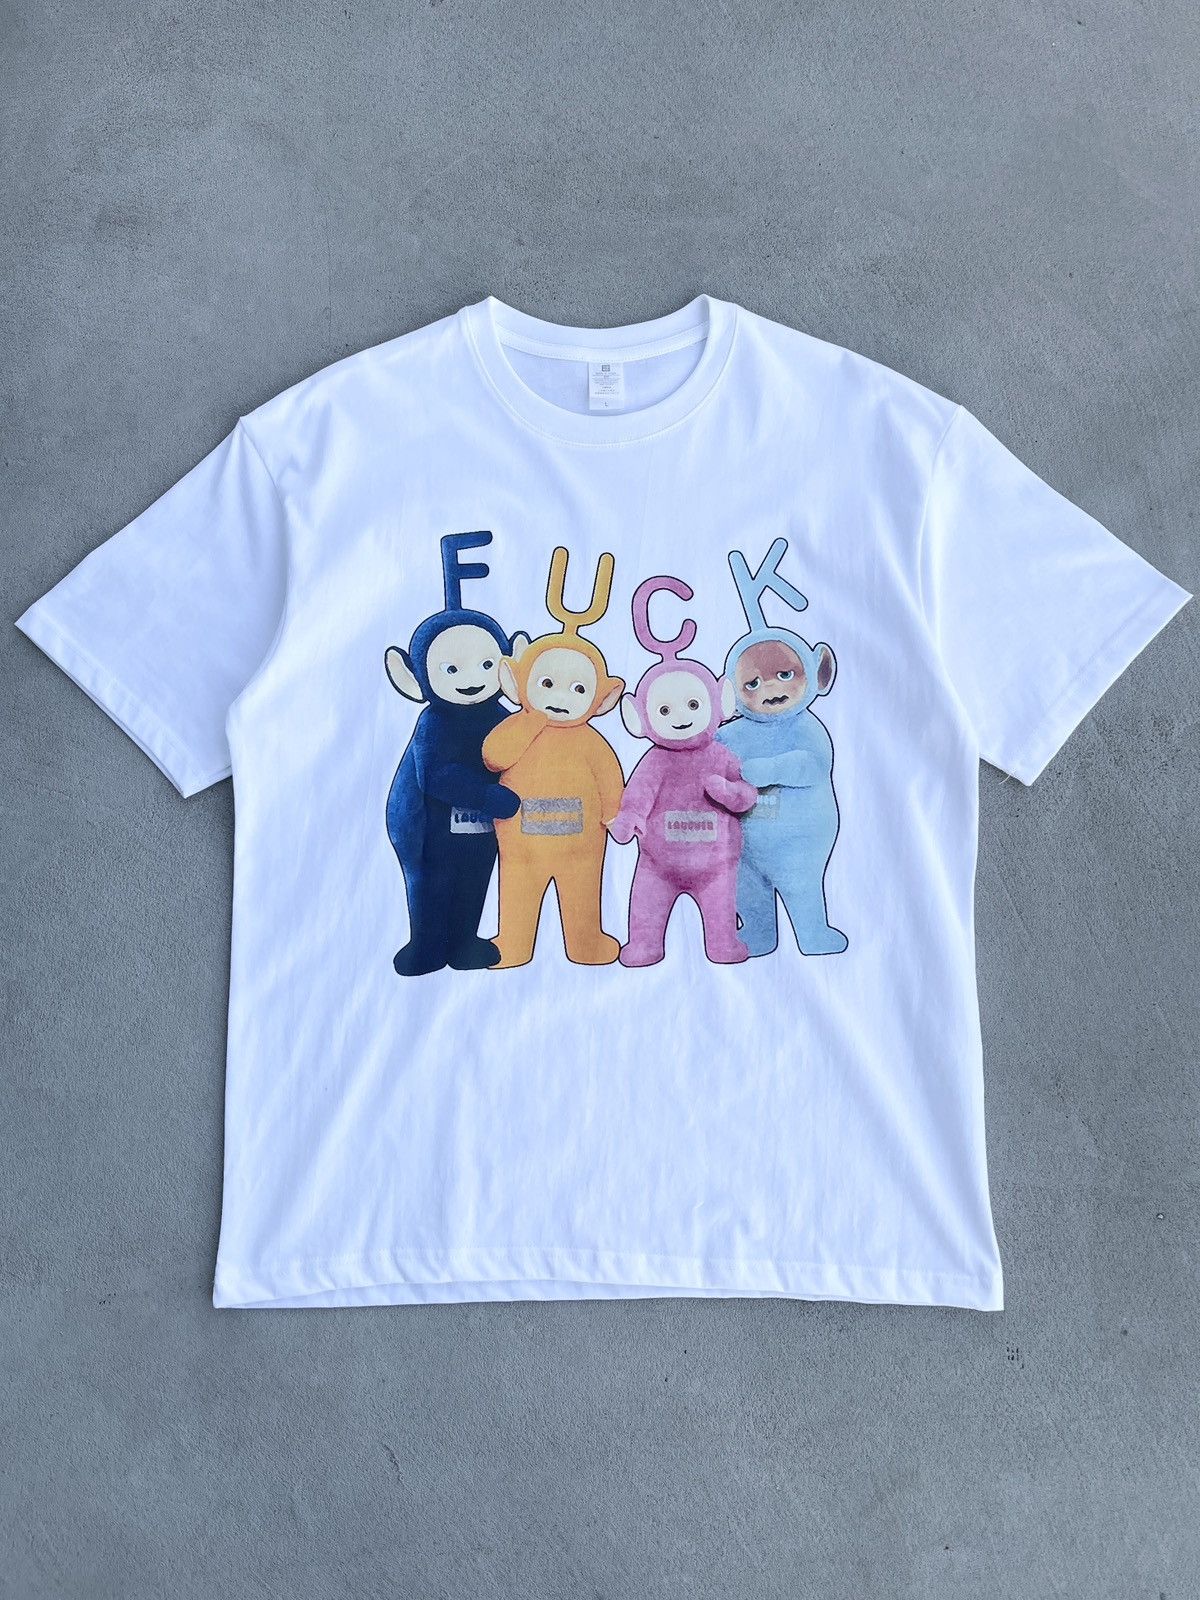 Humor - STEAL! 2000s Teletubbies FUCK Family Characters Tee (L) - 1